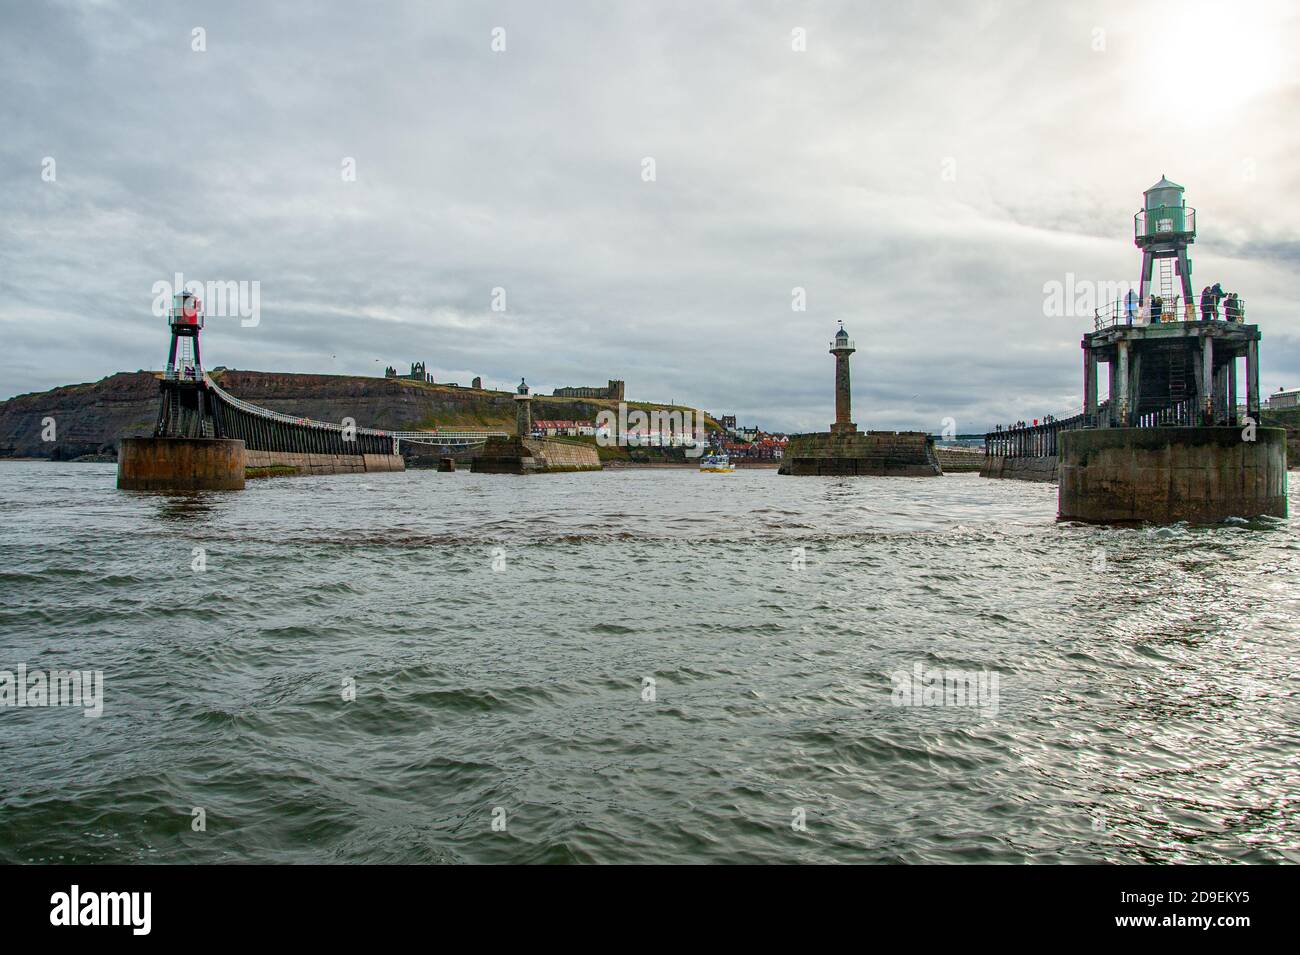 A view from the sea of the ends of the East and West piers and the mouth of the Harbour. Whitby Harbour, Whitby, Yorkshire, England. Stock Photo